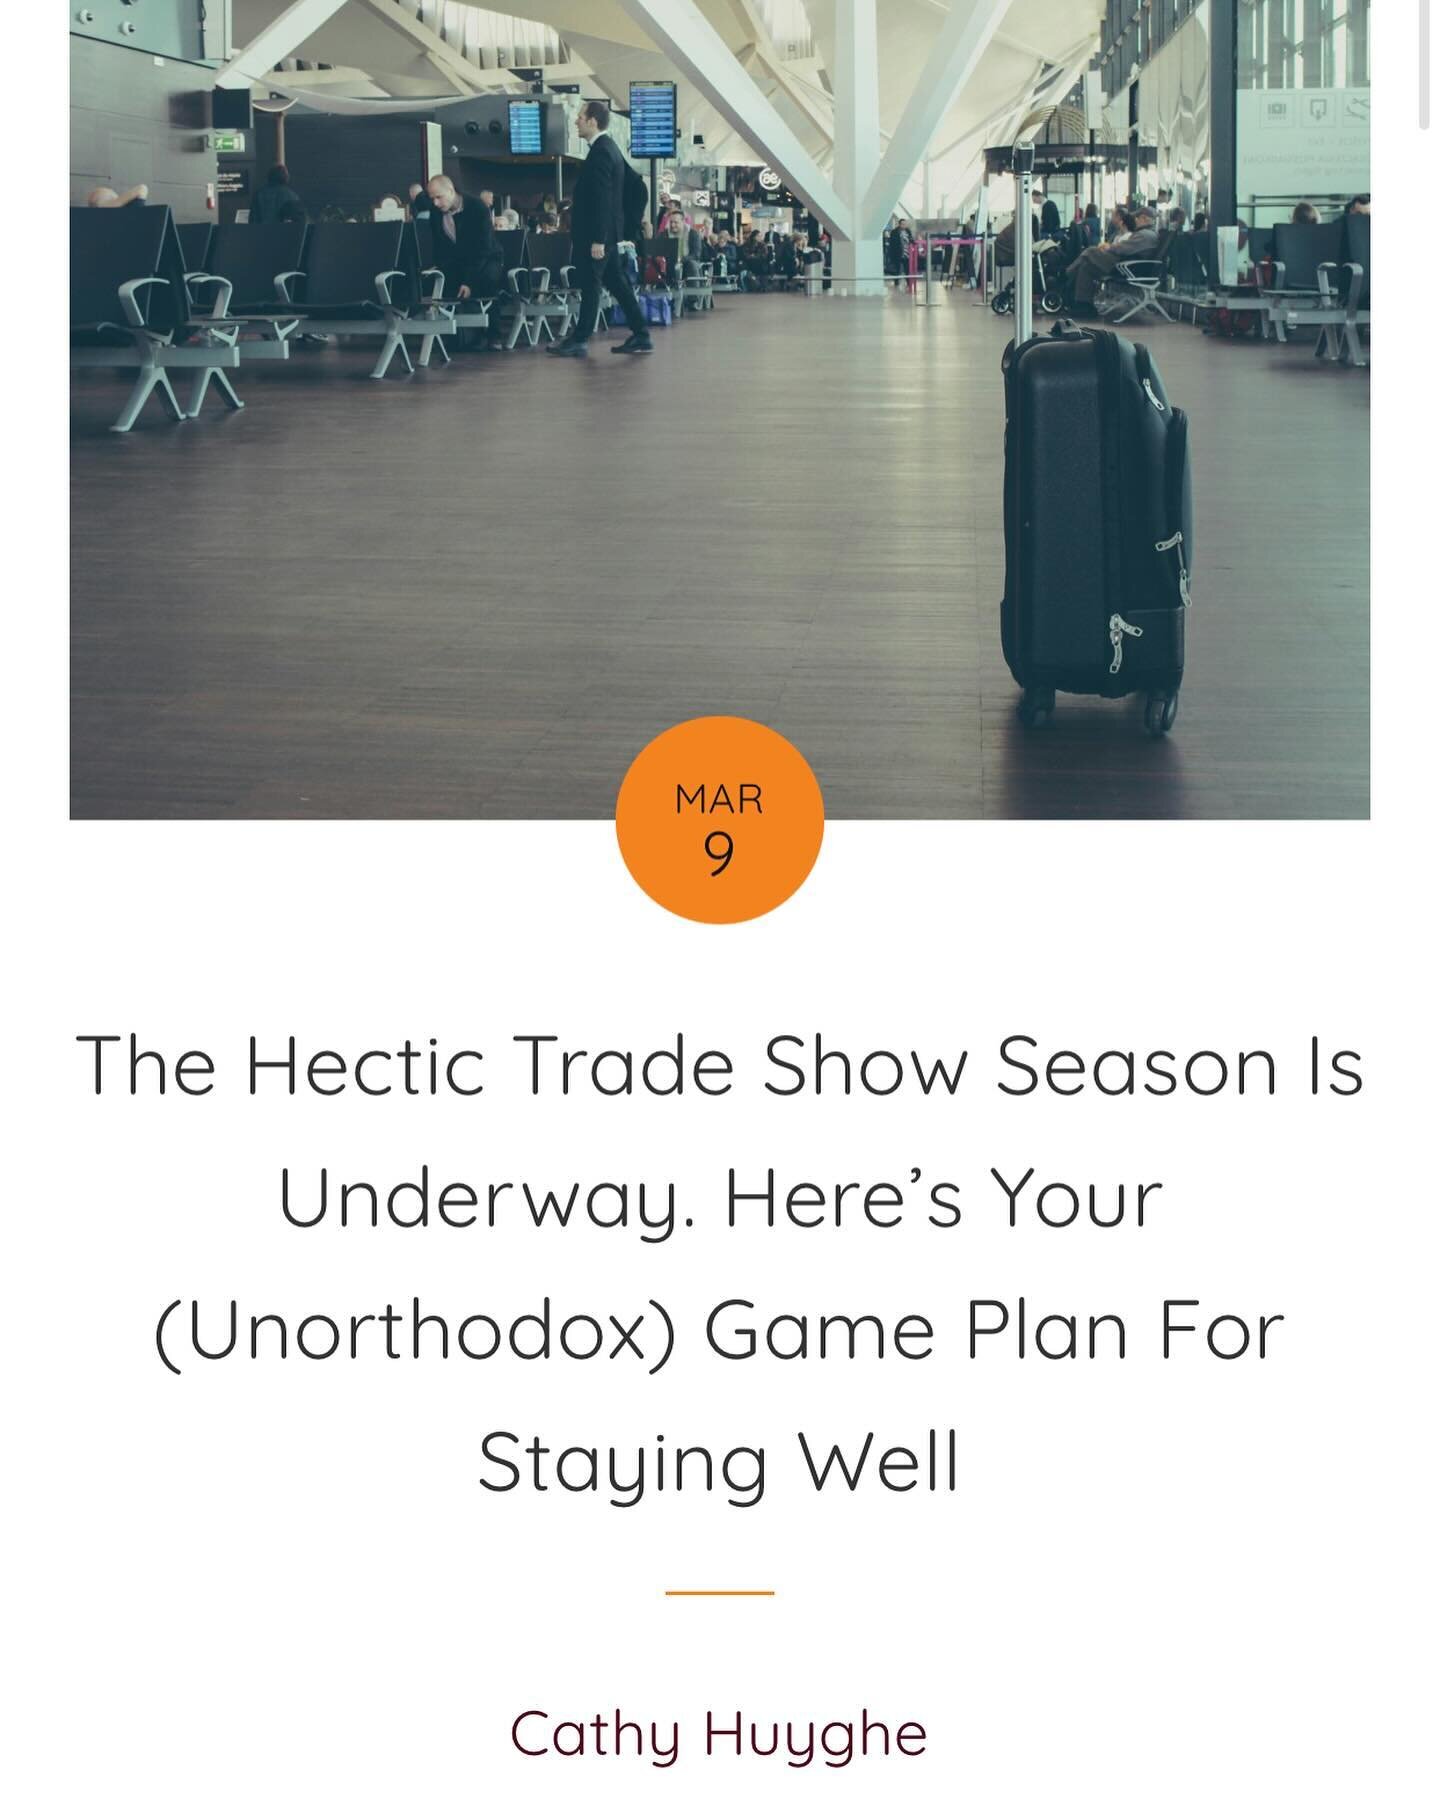 Our new post is LIVE and international wine trade shows are back in full force. This week, Cathy shares her unorthodox wellness tips and packing must-haves for the road-warrior life.

PS - Subscribers get the news first, so if you want to read this a